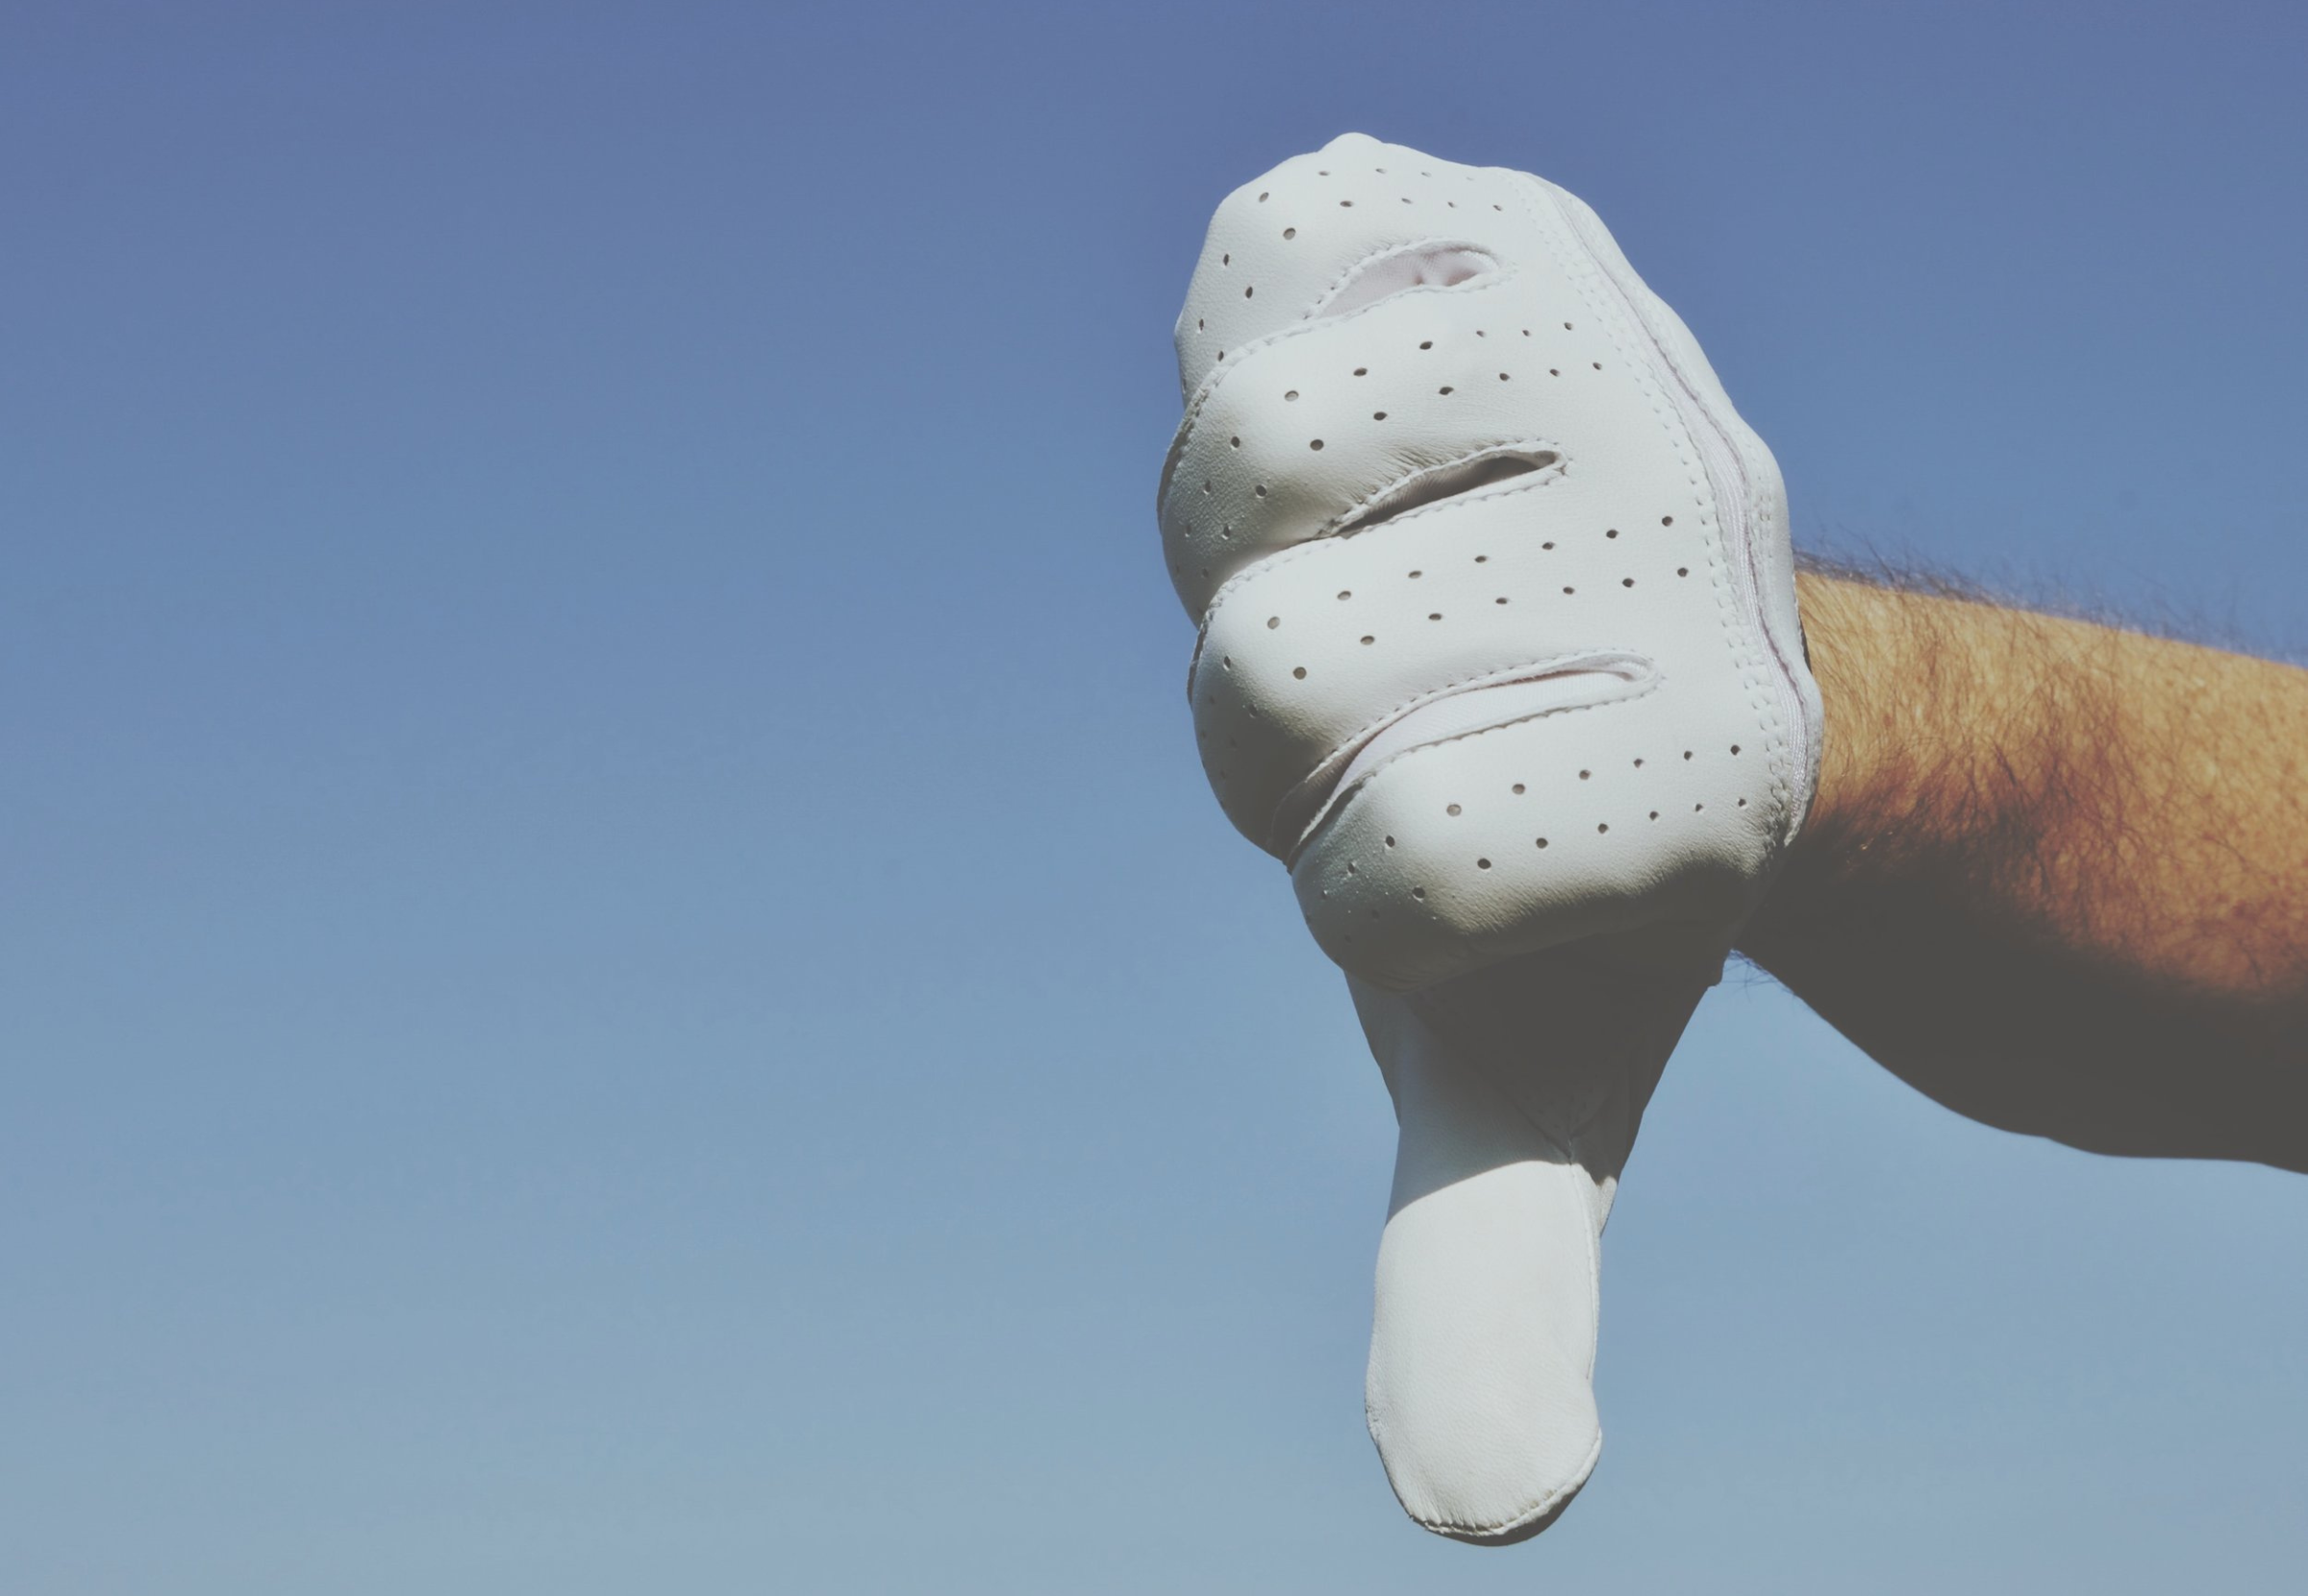 A golfer with a golf glove is pointing his thumb down.